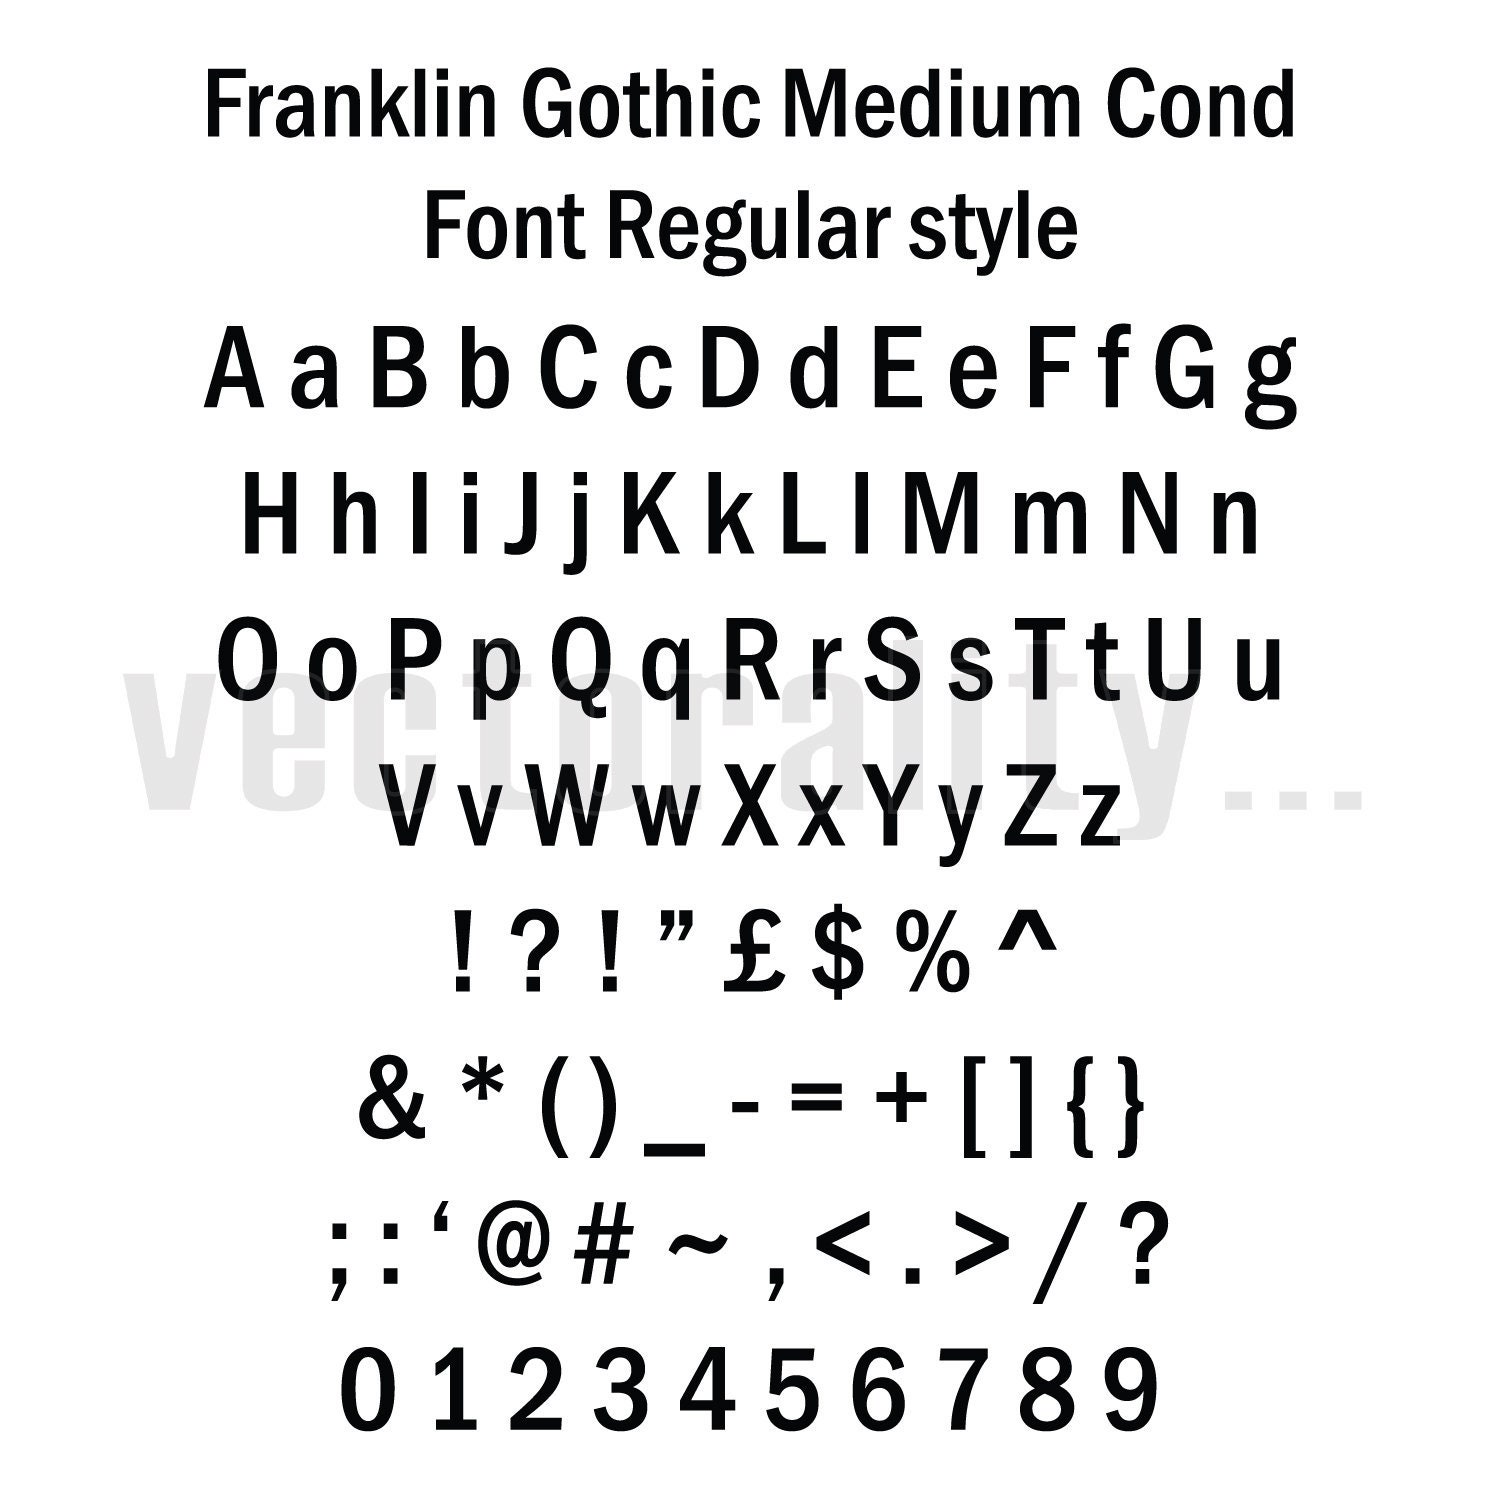 Din cond шрифт. Franklin Gothic шрифт. Franklin Gothic Medium шрифт. Шрифт Franklin Gothic алфавит. Franklin Gothic Heavy.